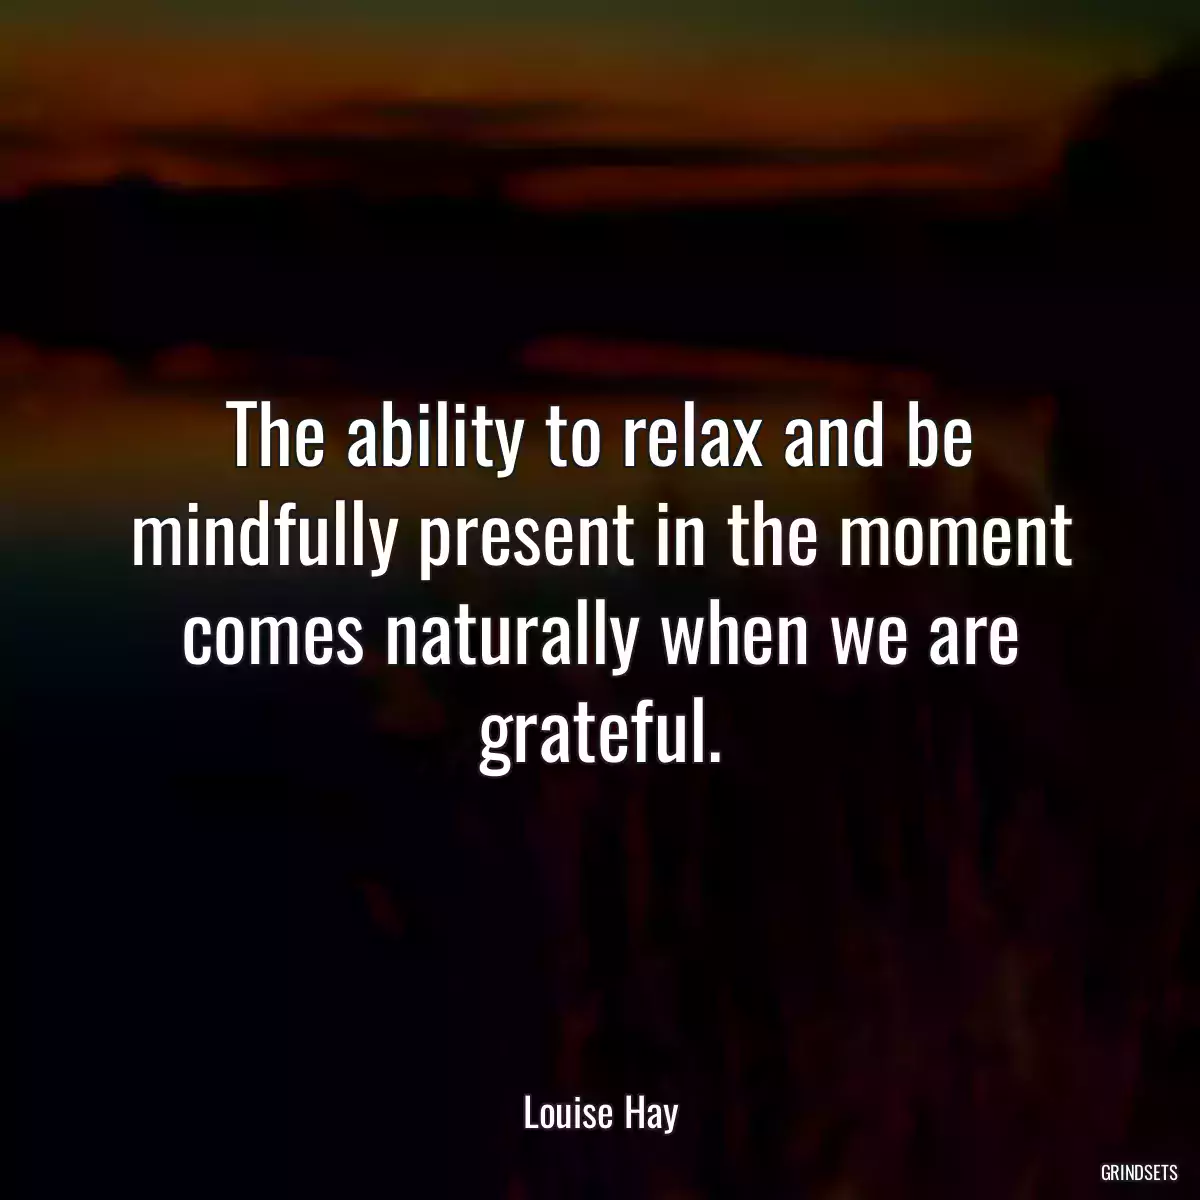 The ability to relax and be mindfully present in the moment comes naturally when we are grateful.